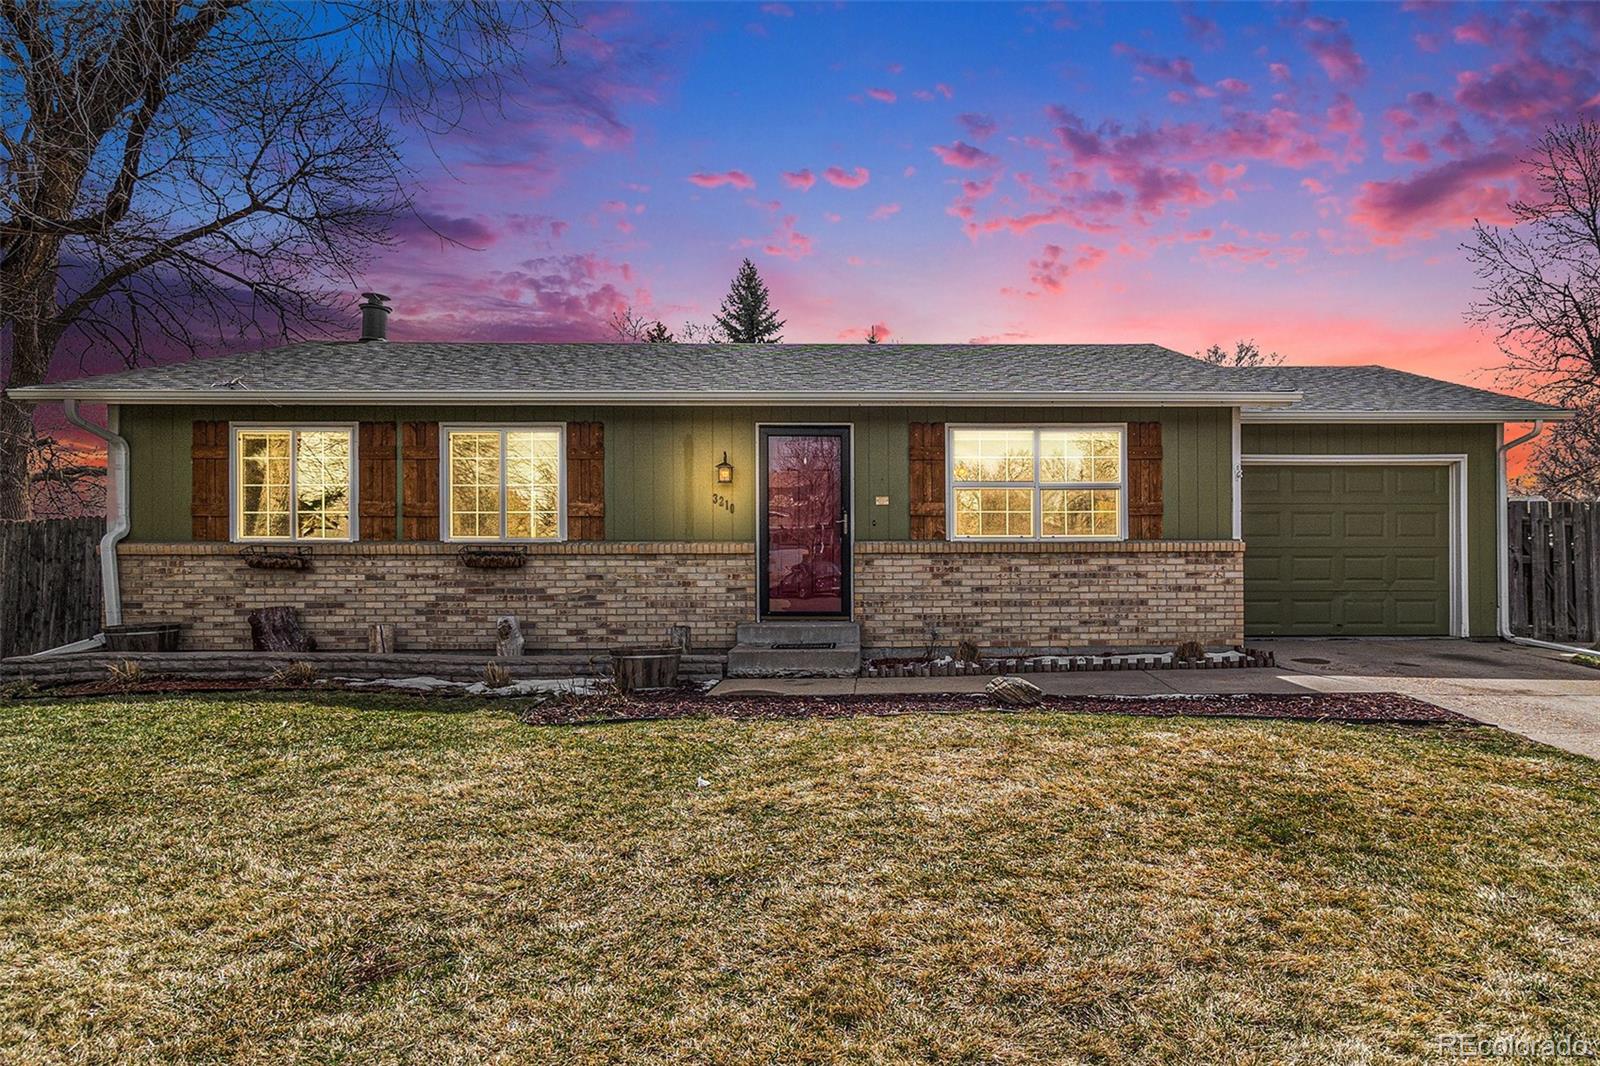 3210 w 133rd circle, broomfield sold home. Closed on 2024-05-02 for $540,000.